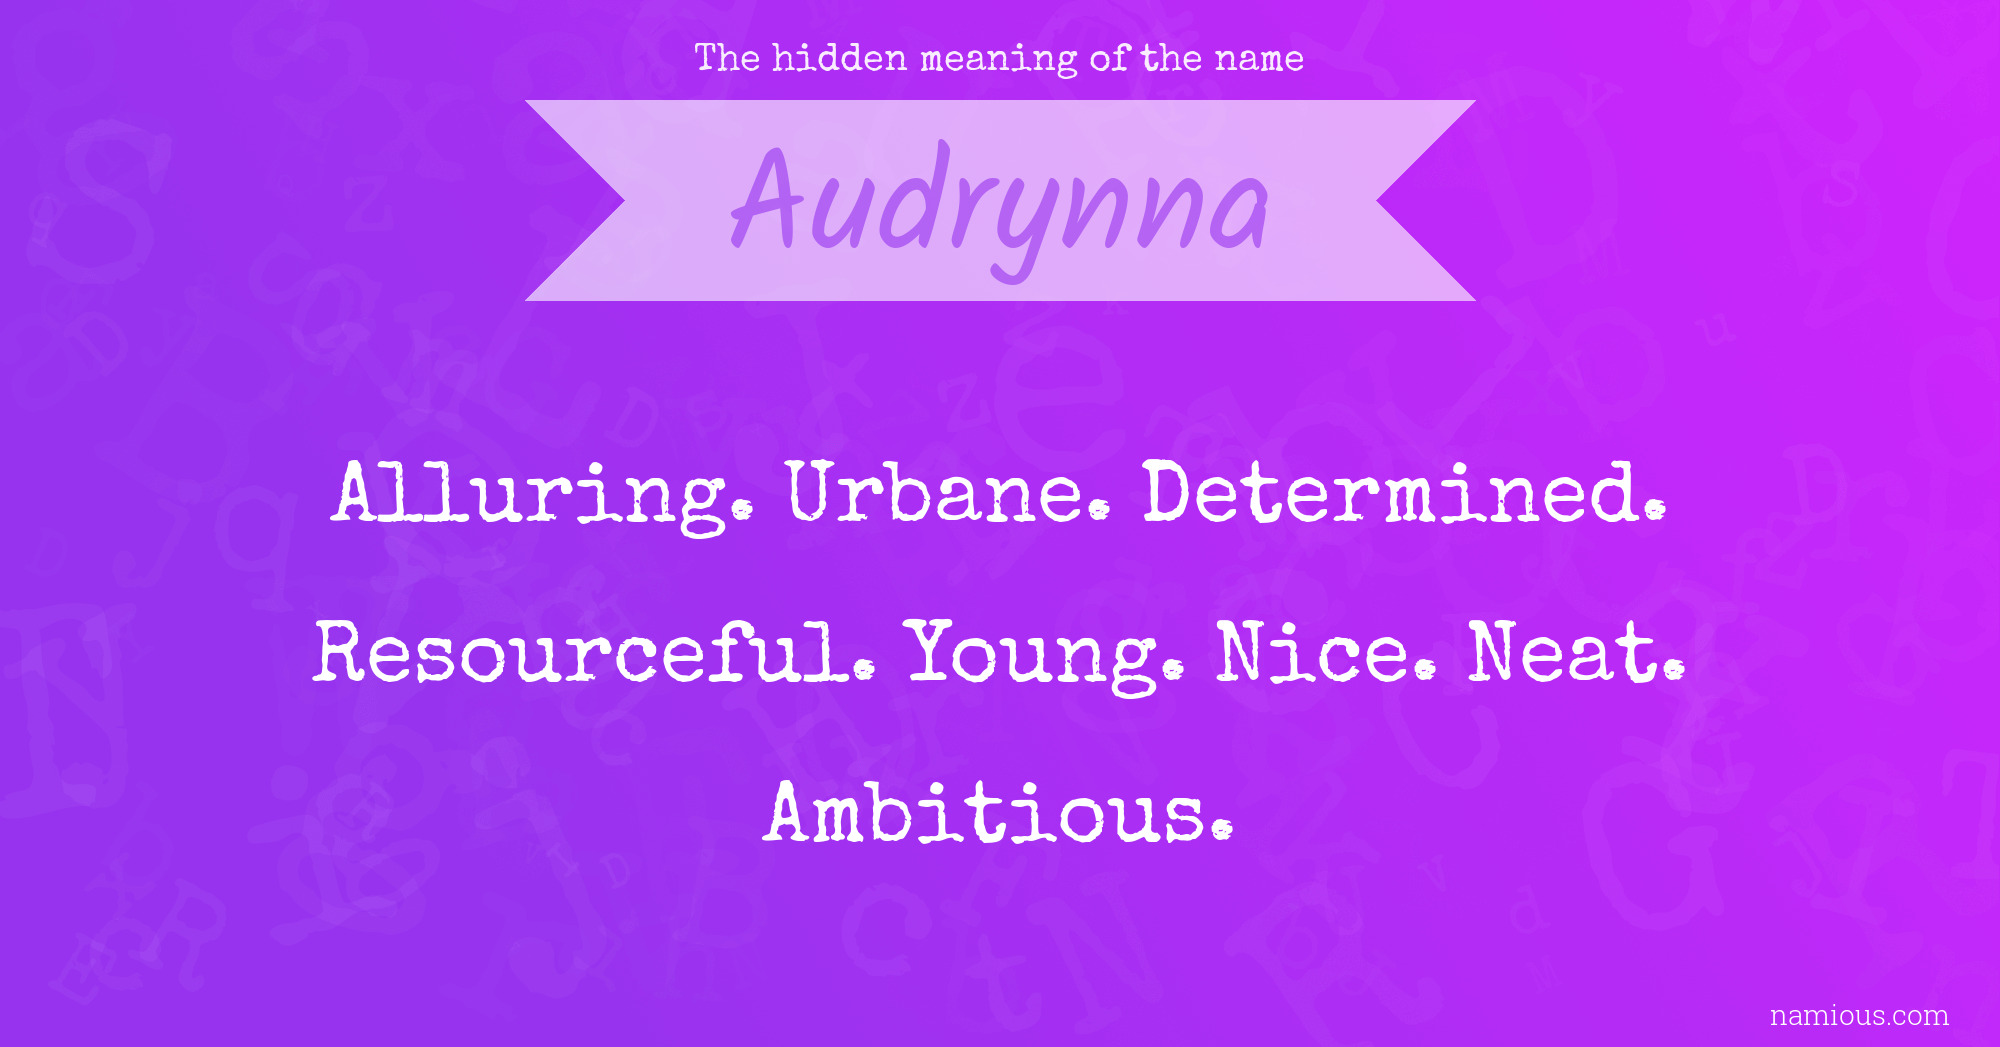 The hidden meaning of the name Audrynna